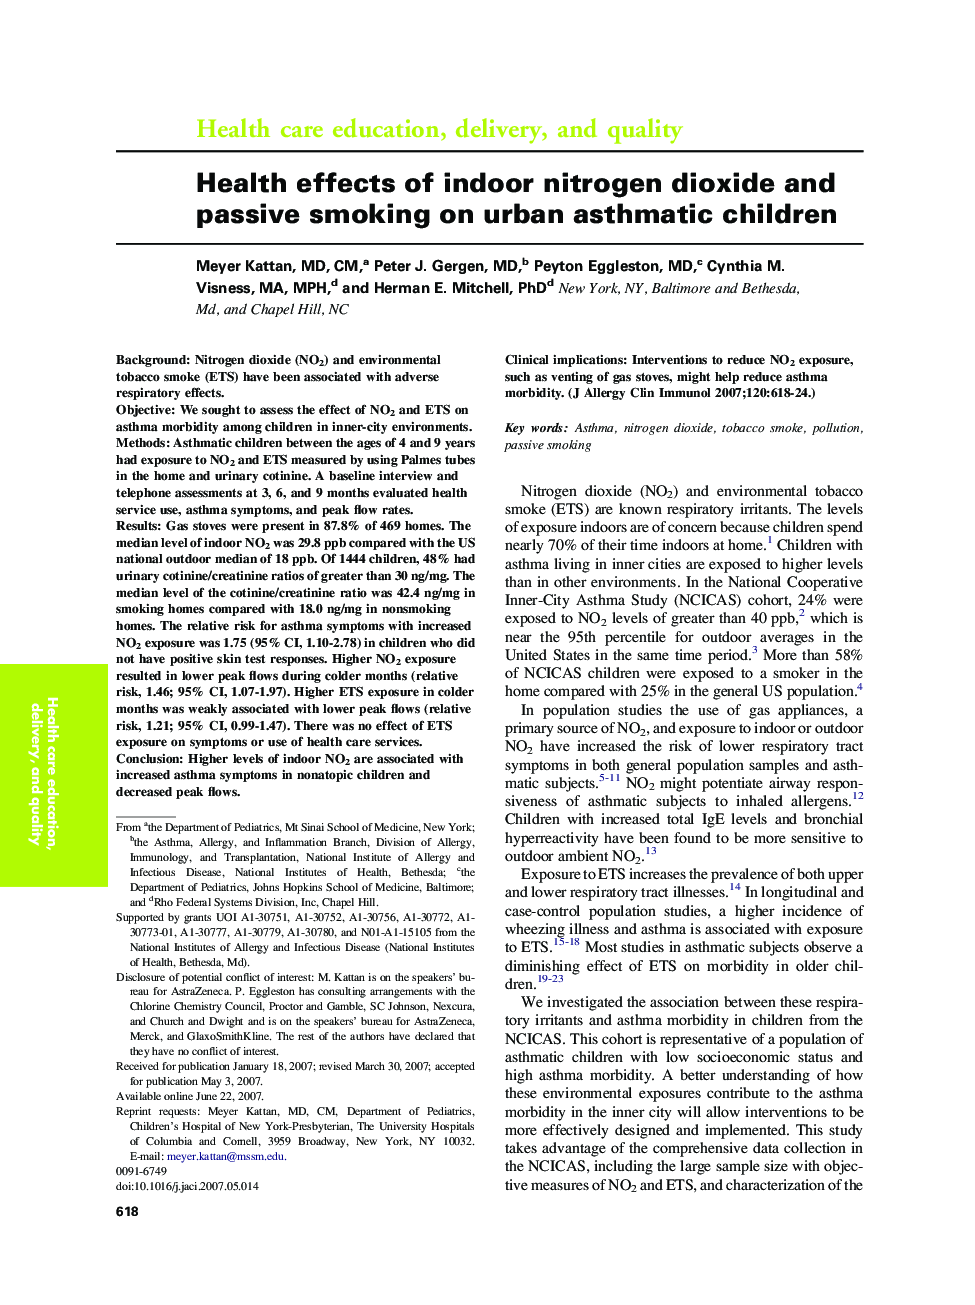 Health effects of indoor nitrogen dioxide and passive smoking on urban asthmatic children 